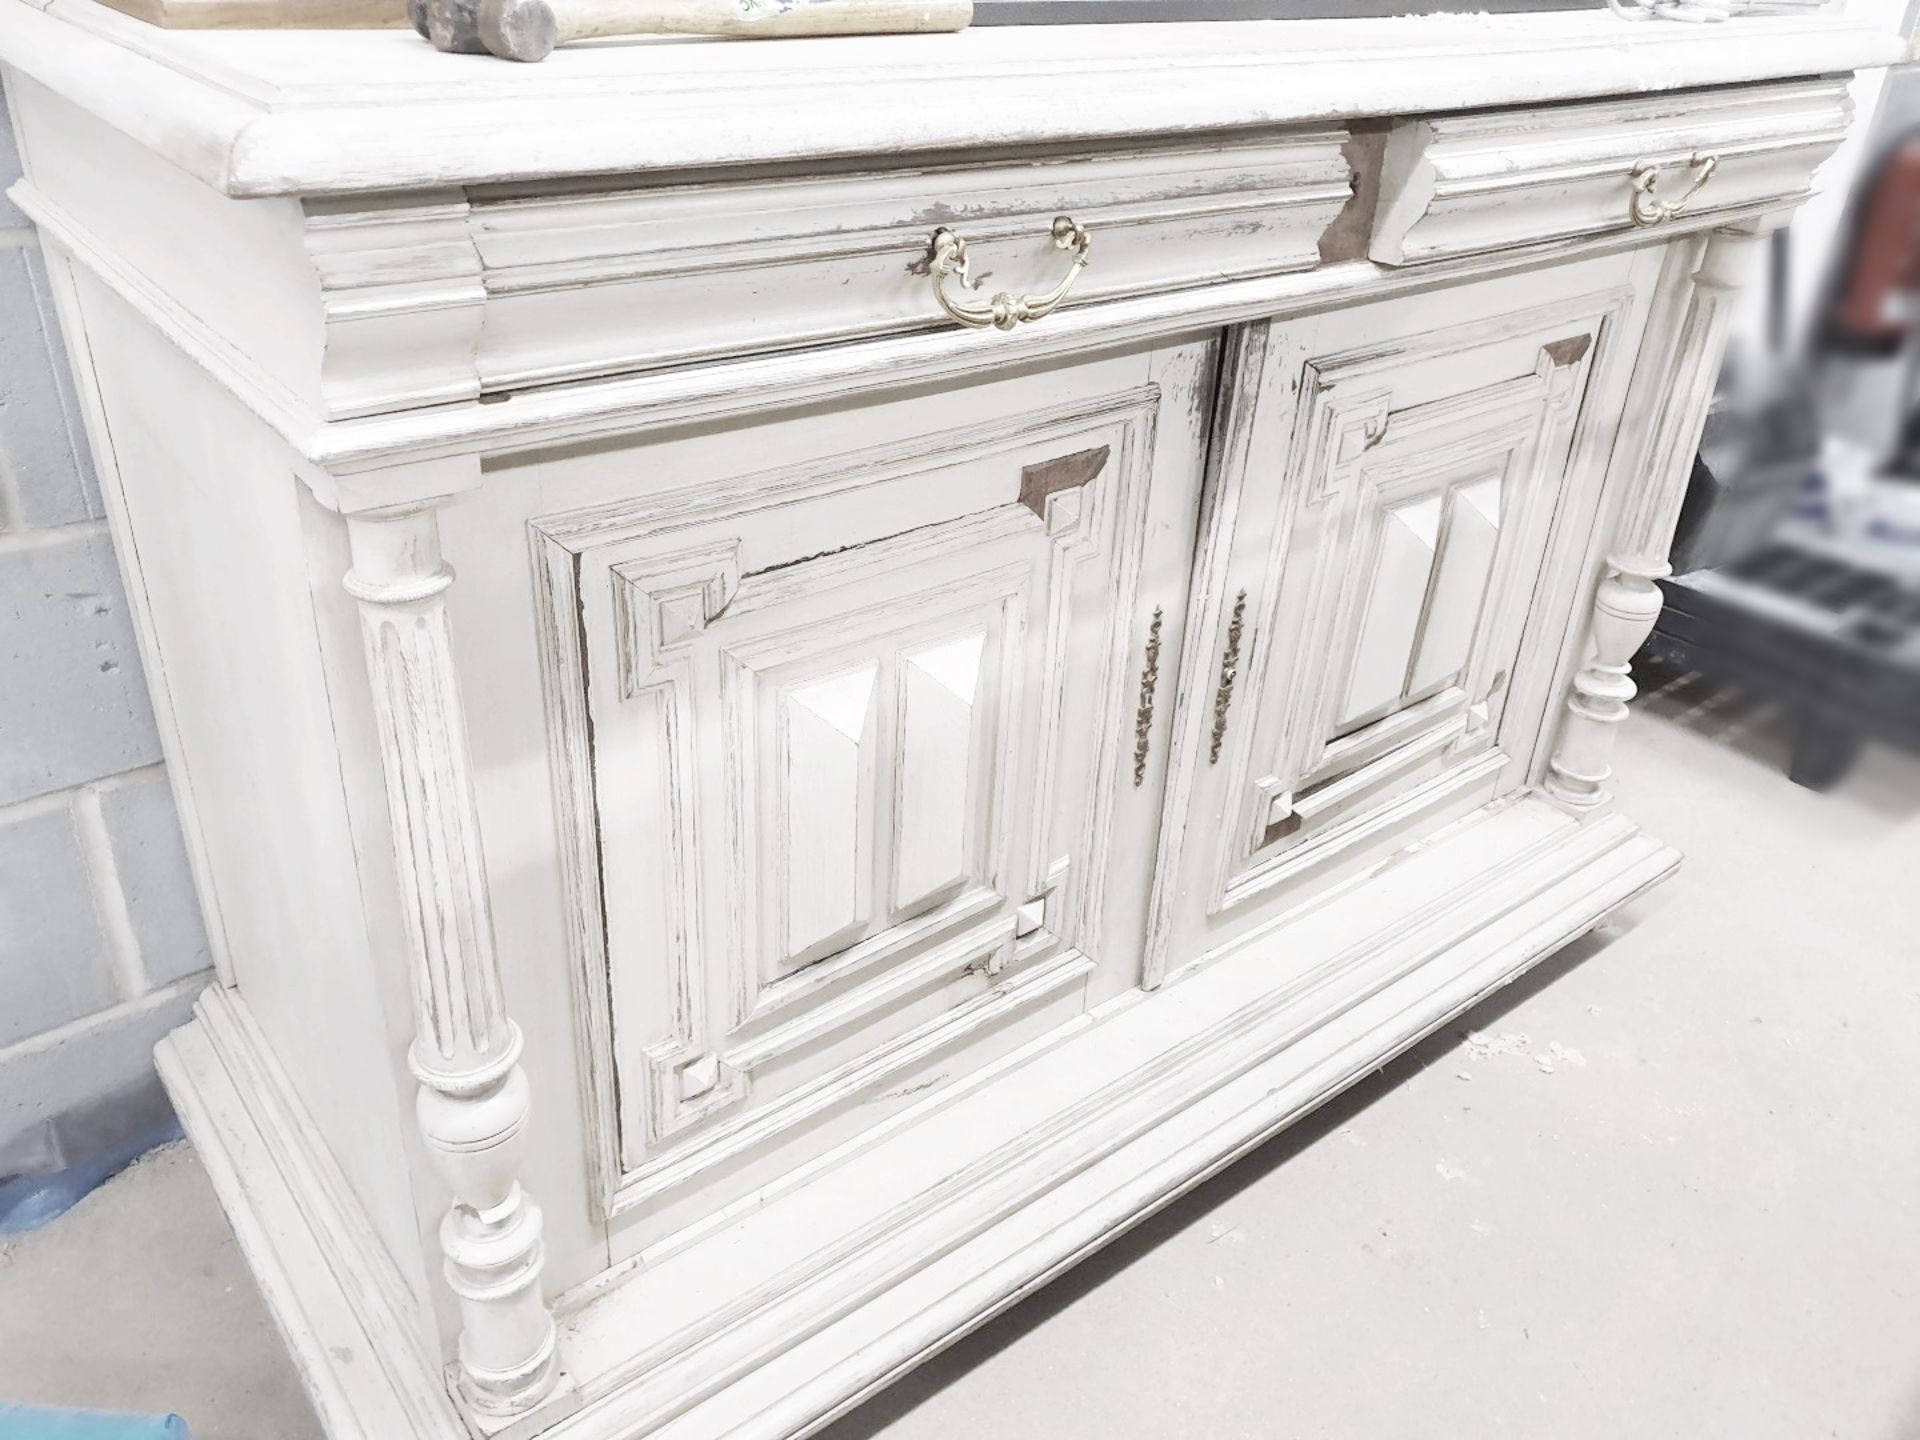 1 x Shabby Chic Dresser in Distressed White - H102/205 x W147 x D66 cms - Ref PA206 - CL463 -